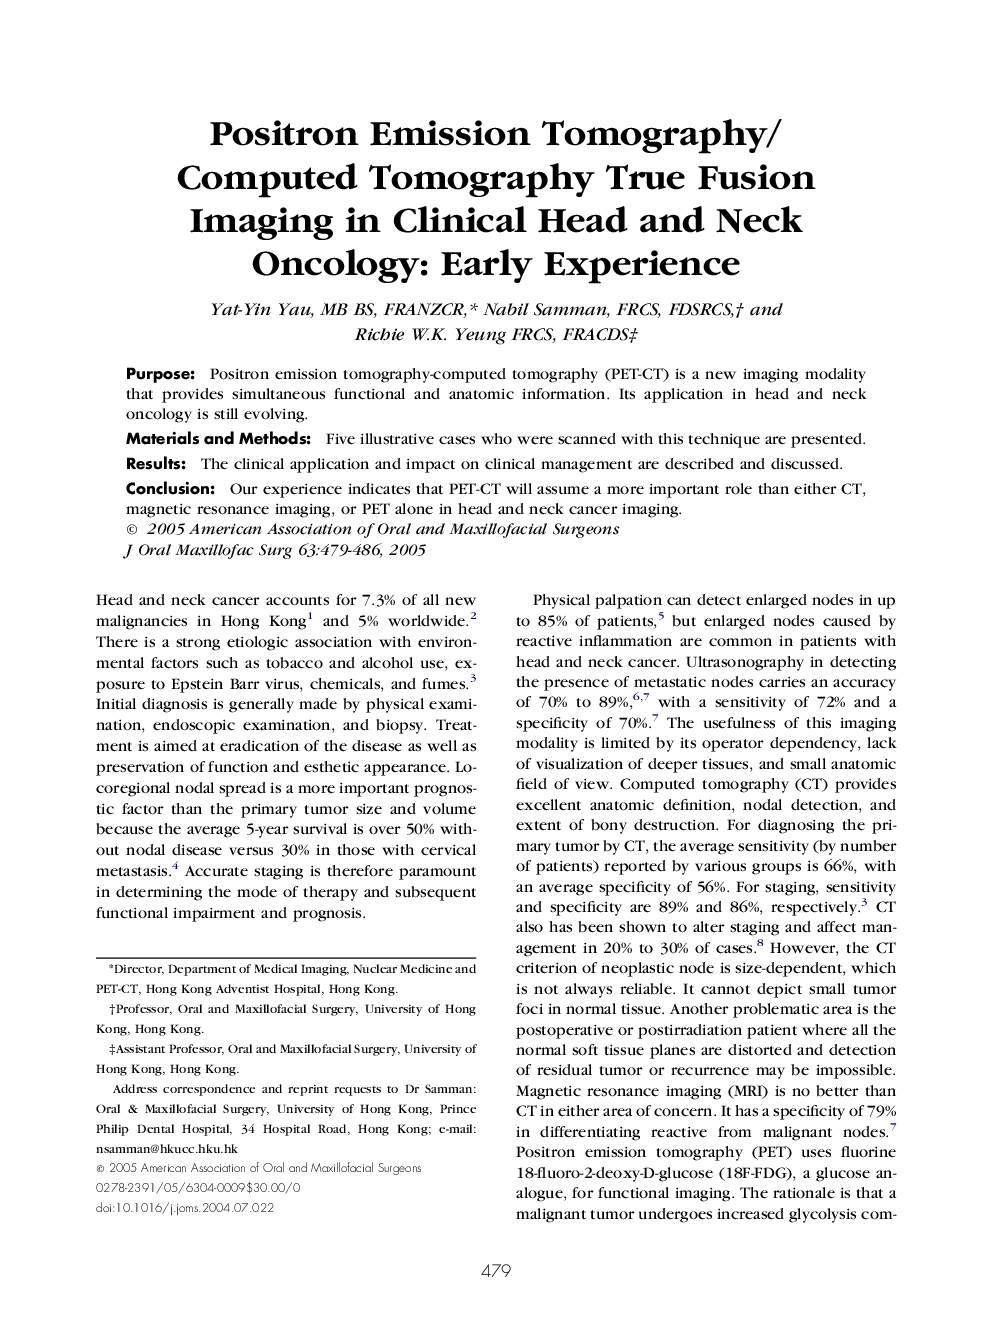 Positron emission tomography/ computed tomography true fusion imaging in clinical head and neck oncology: Early experience